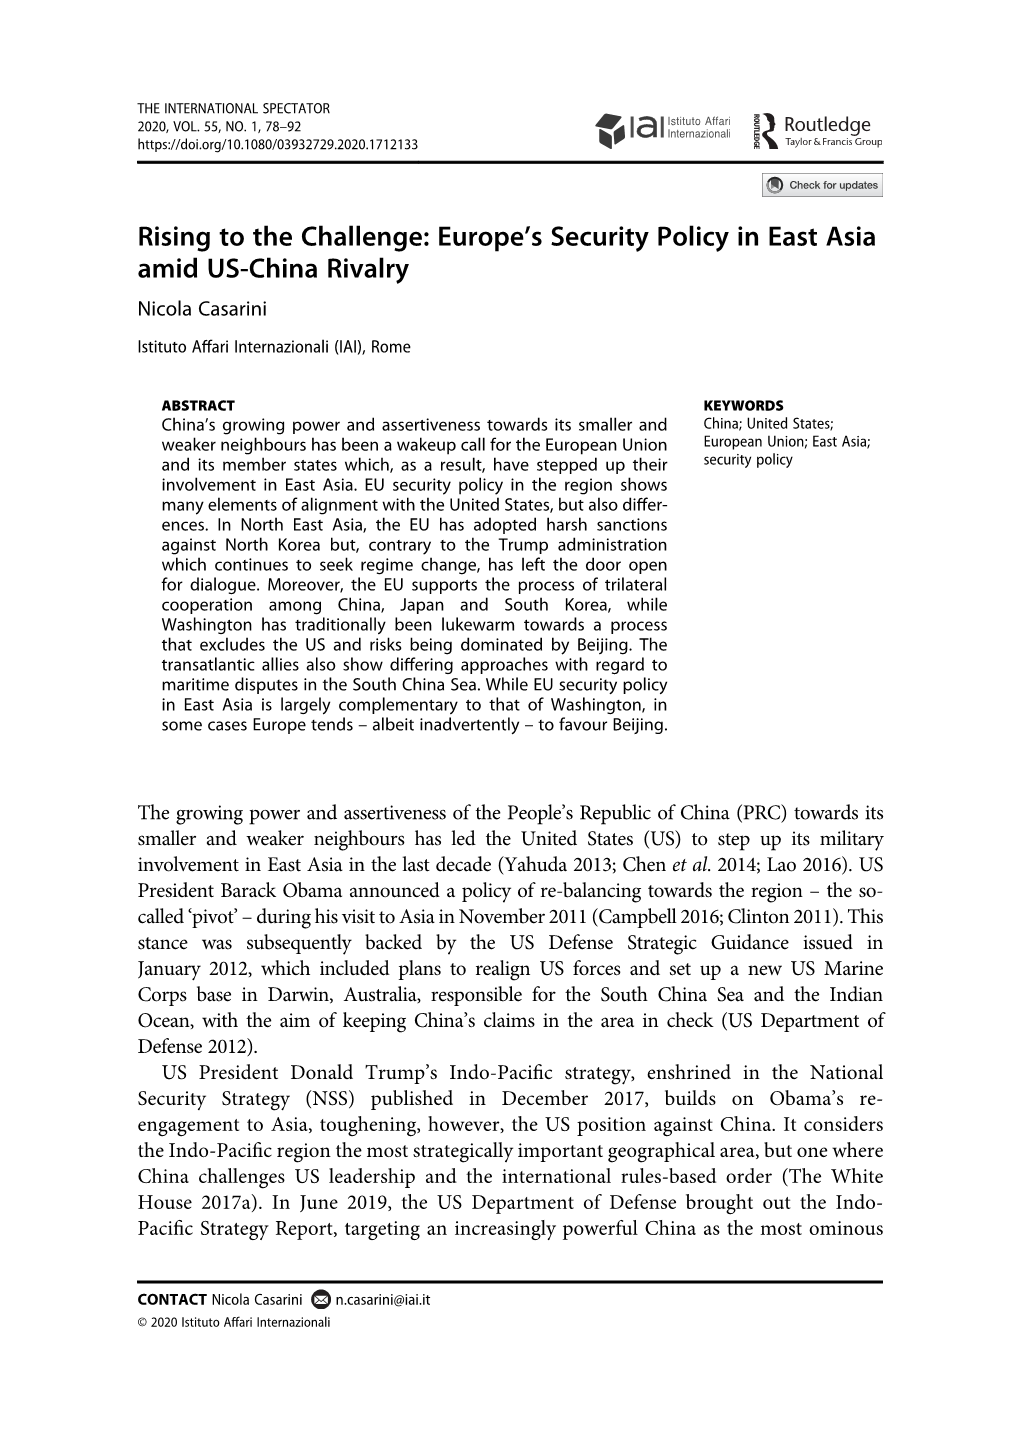 Europe's Security Policy in East Asia Amid